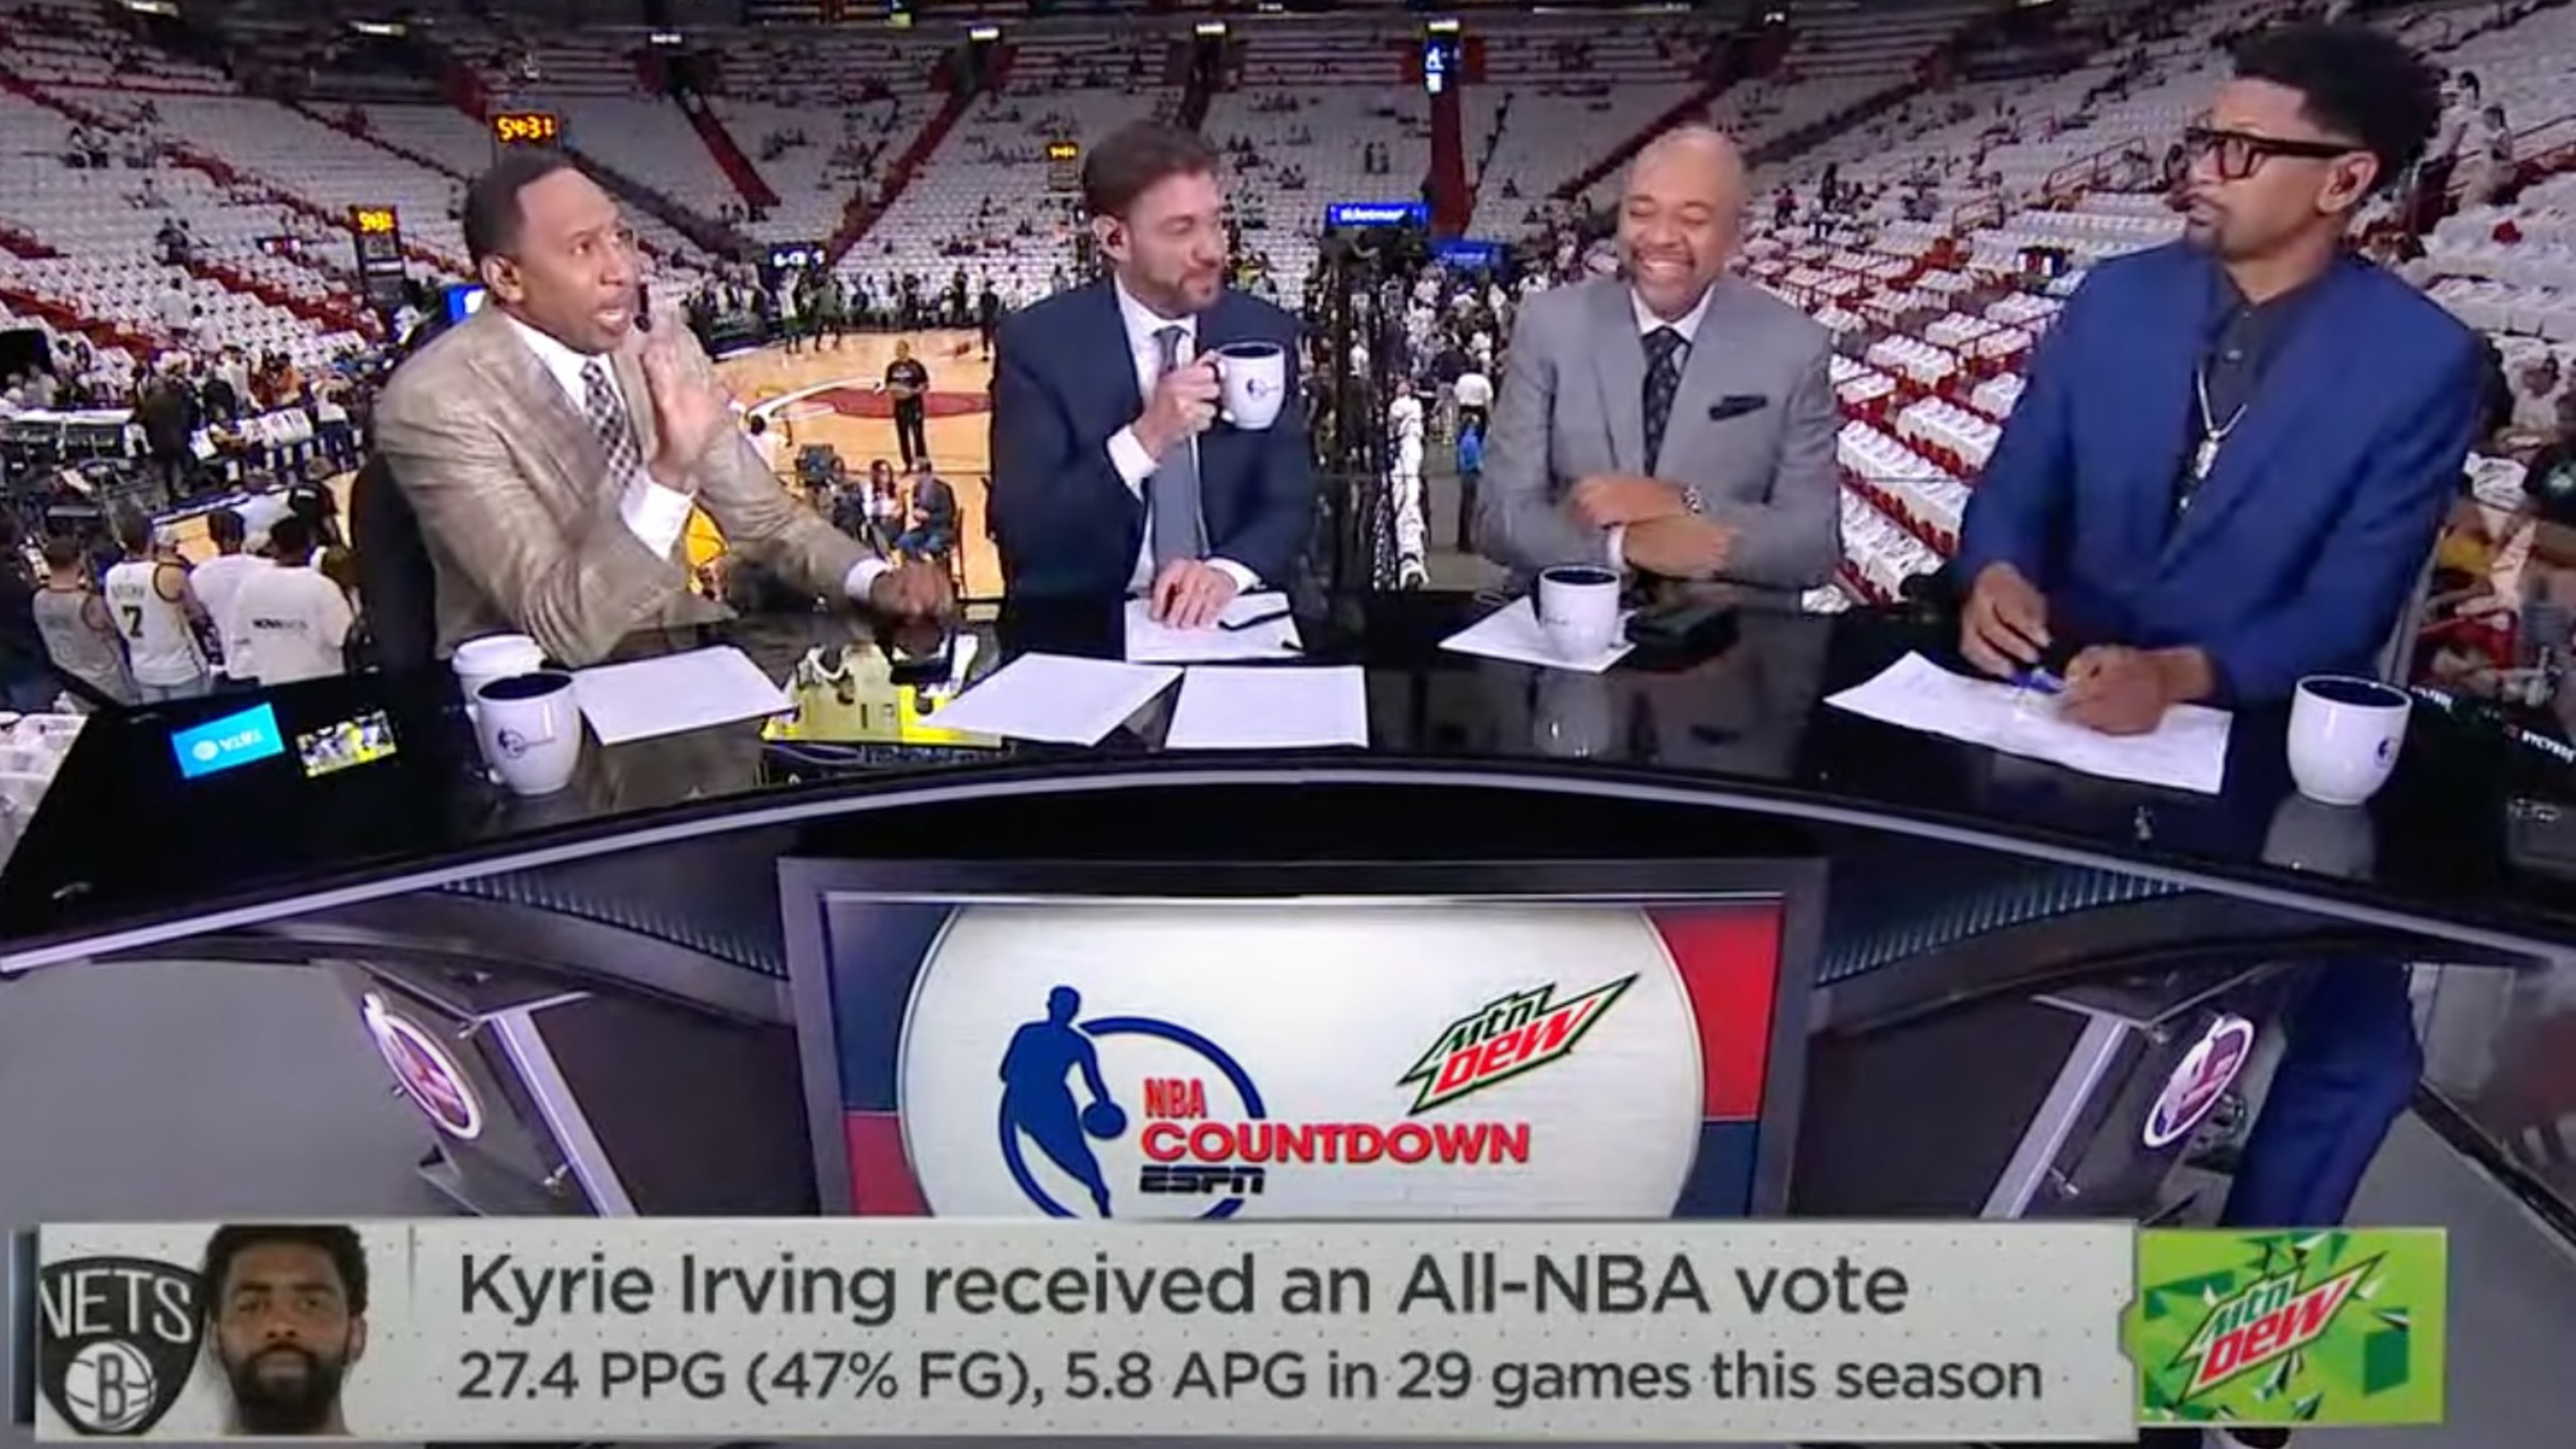 Stephen A. Smith Went Off On Jalen Rose After Rose Admitted He Voted
Kyrie Irving All-NBA